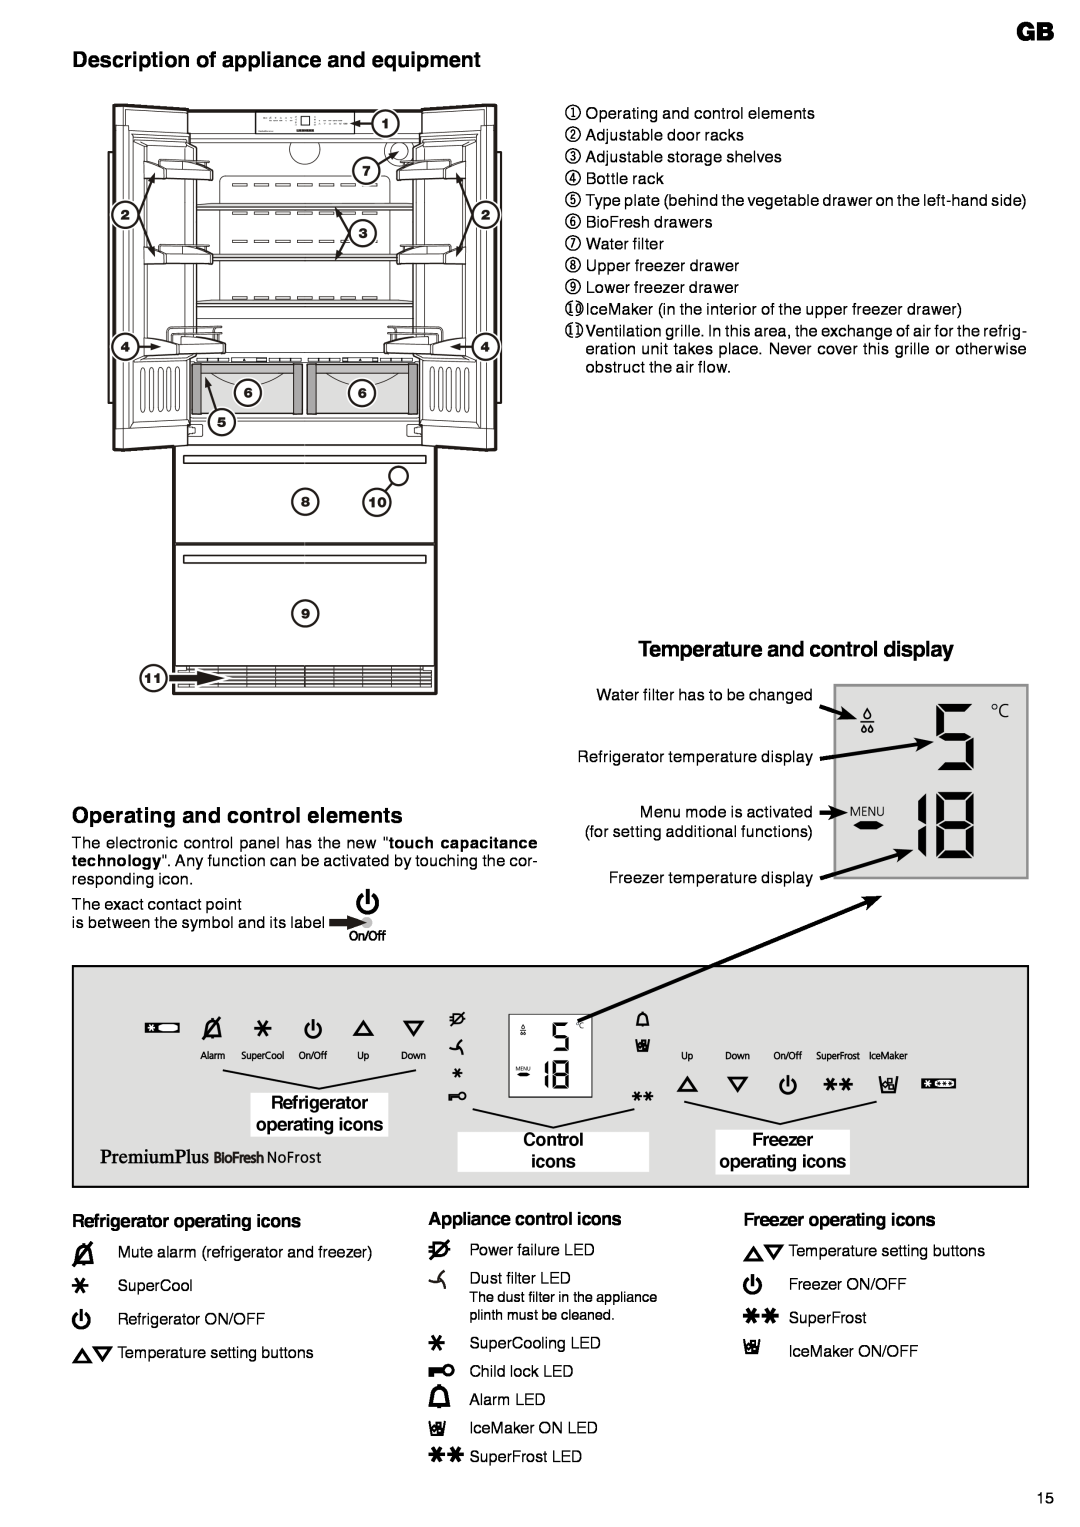 Liebherr 7082-499-00 manual Description of appliance and equipment, Operating and control elements, icons 